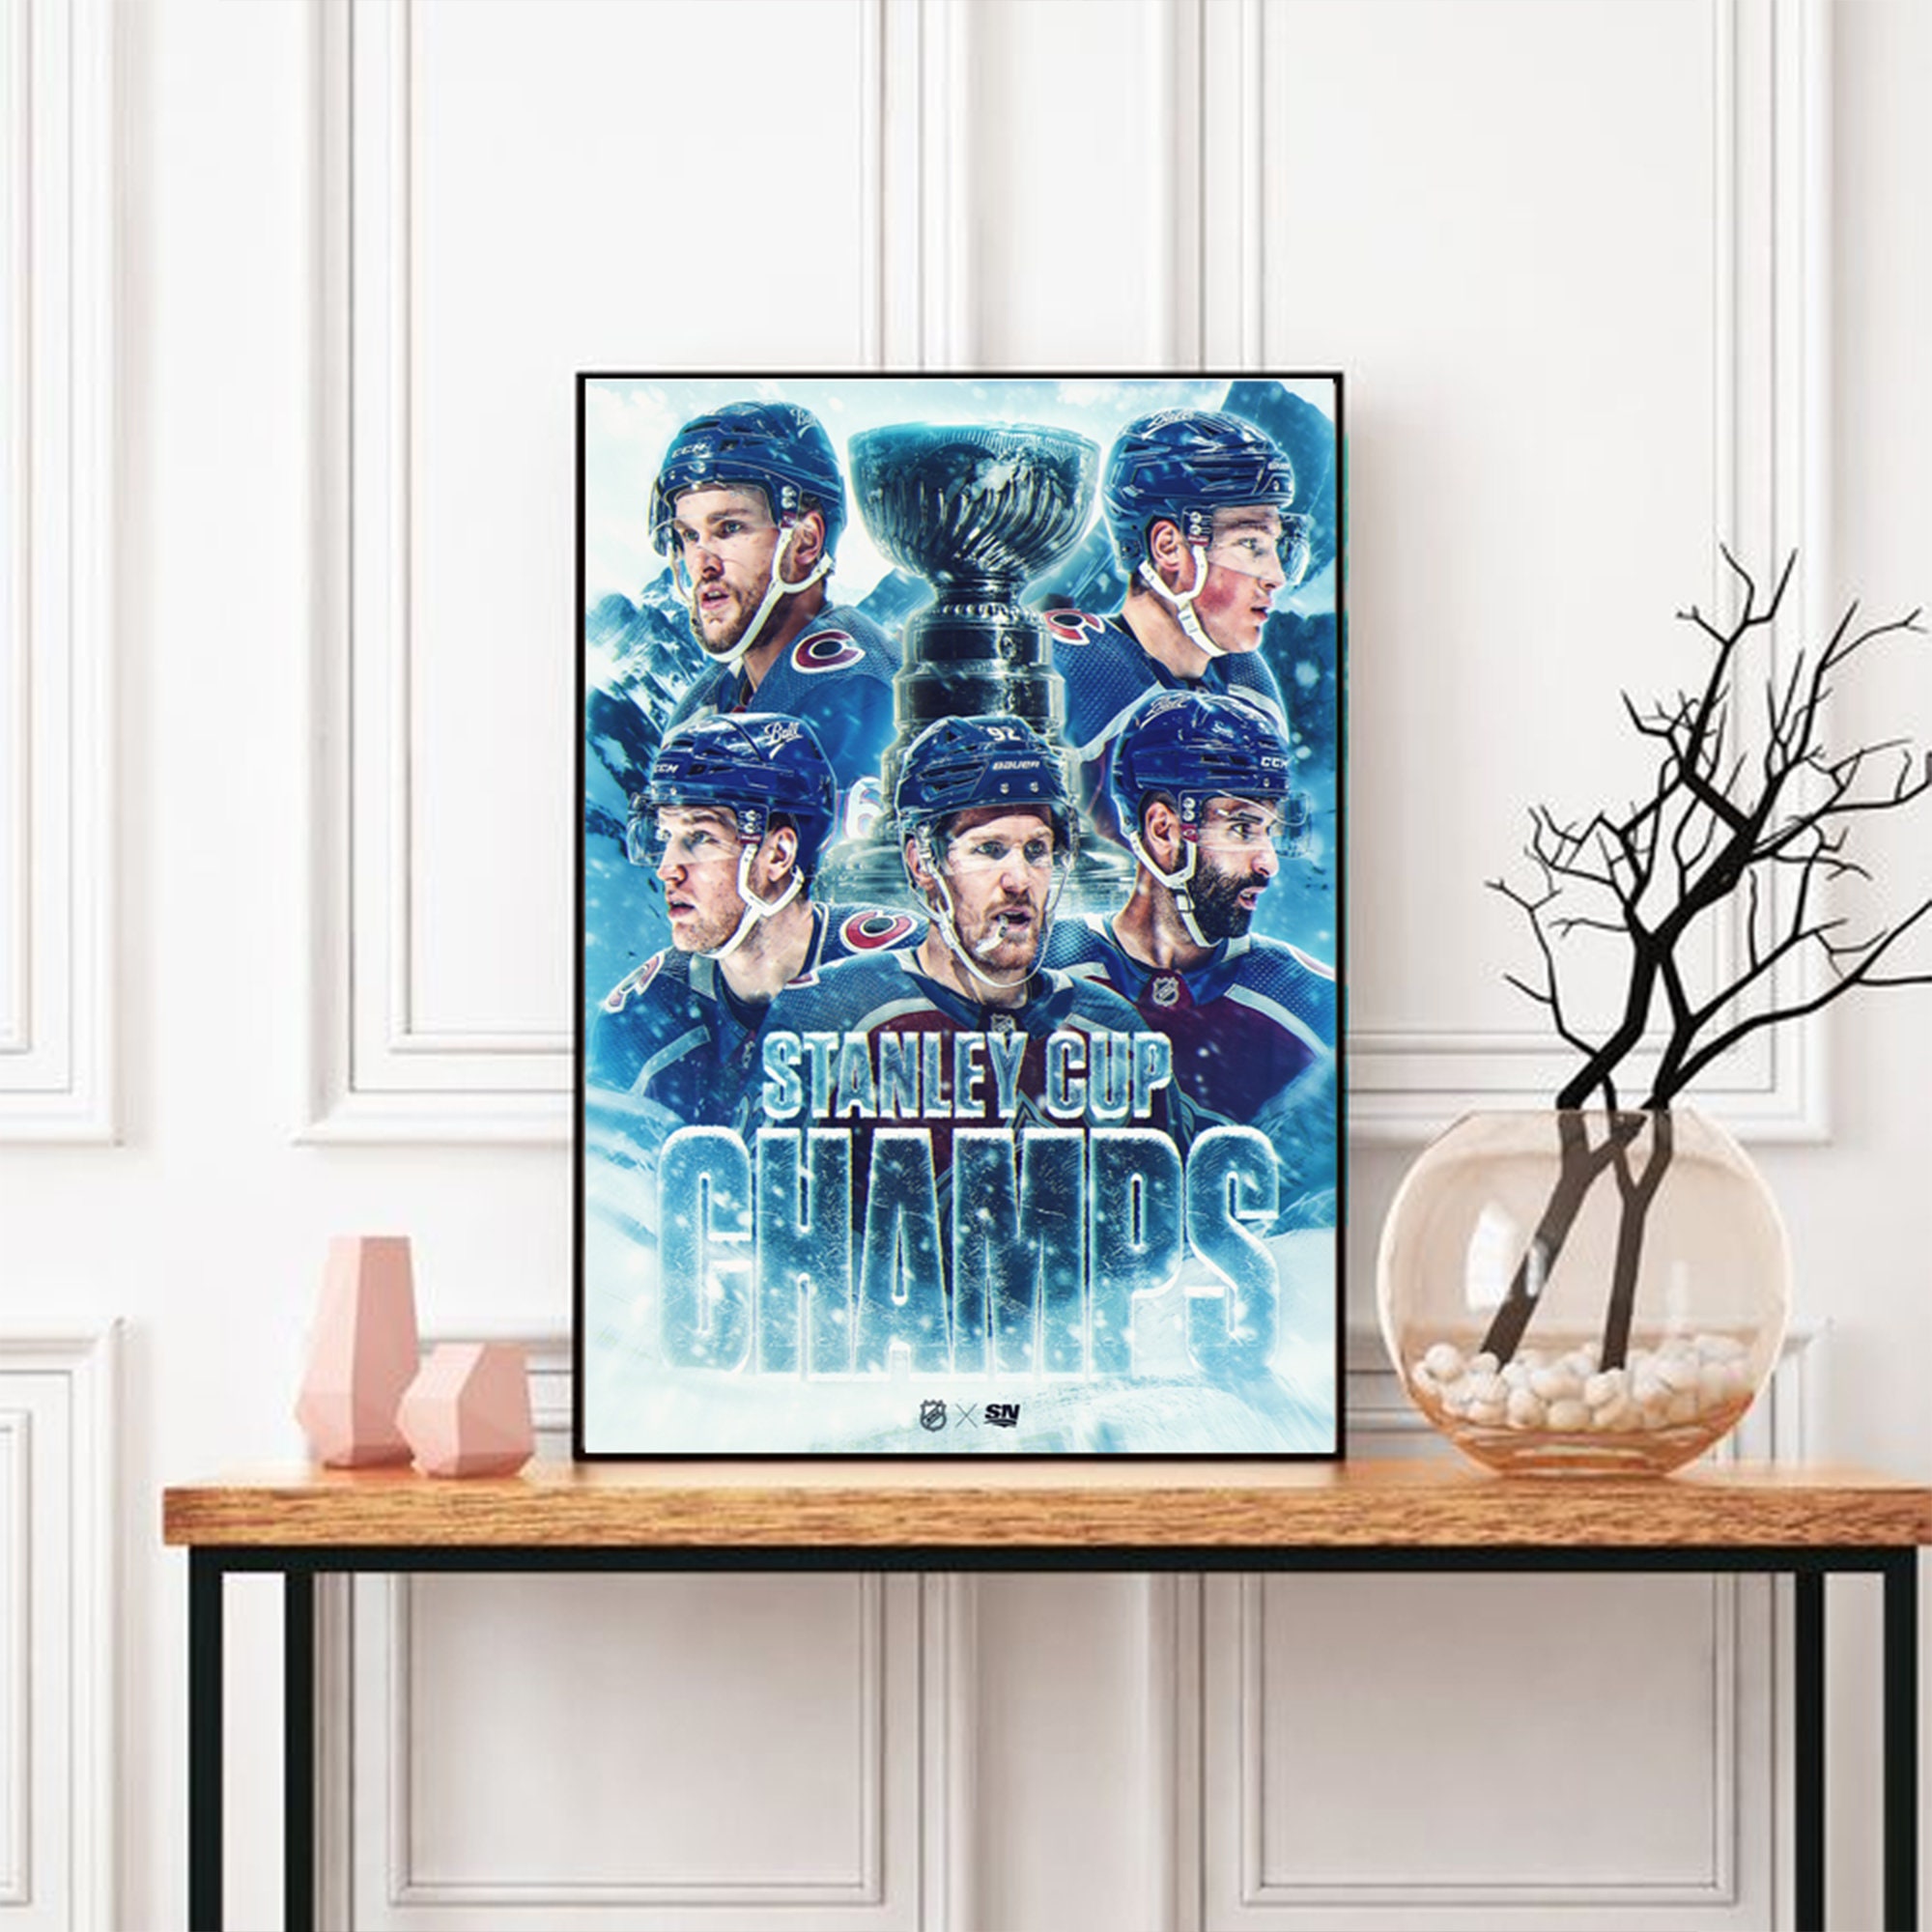 2022 Colorado Avalanche Stanley Cup Champions Fan Canvas Poster